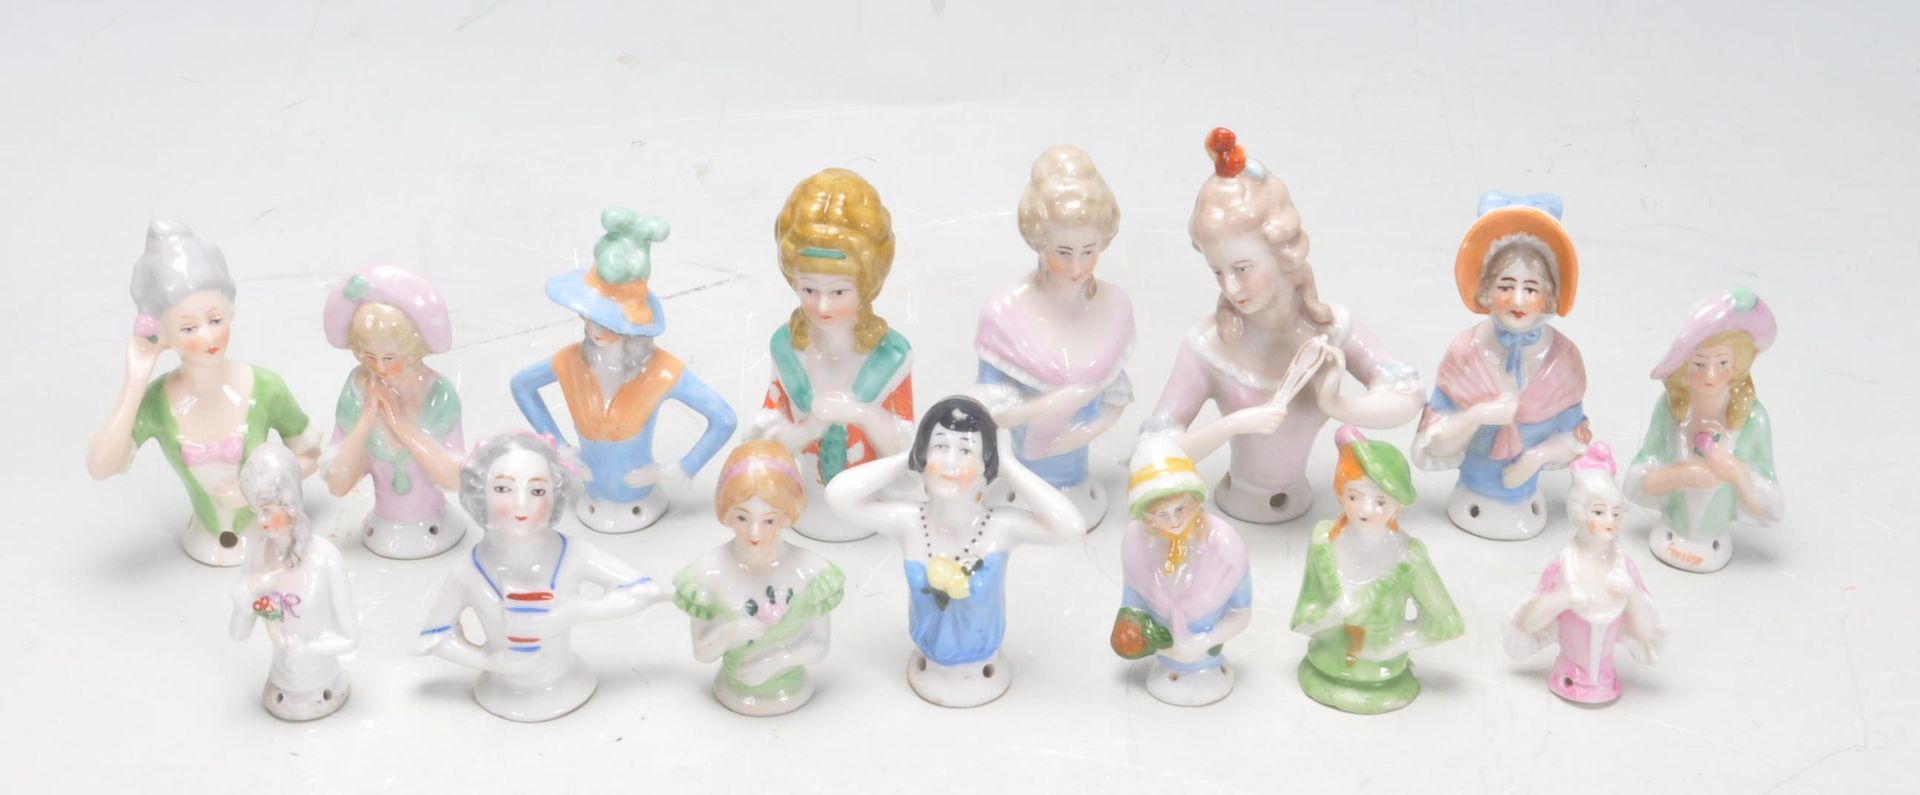 COLLECTION OF 28 PIN CUSHION HALF DOLLS - Image 2 of 4